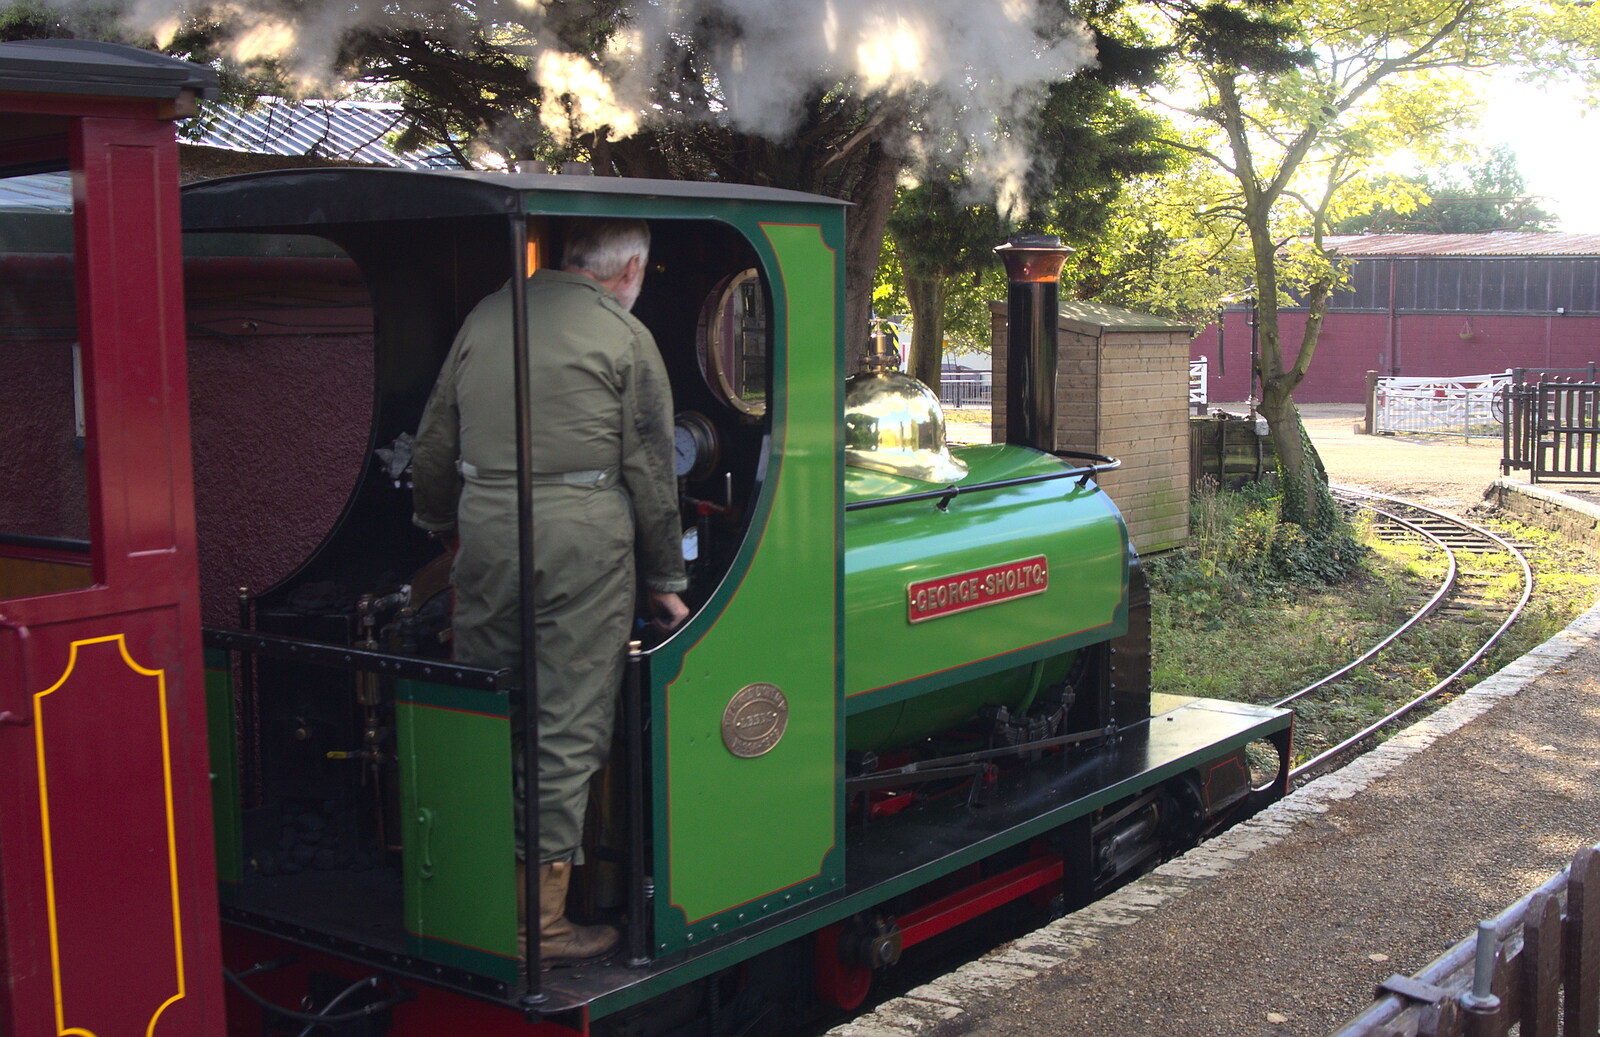 The George Sholto heads off from Alan Bloom's Gardens, Bressingham, Norfolk - 6th October 2012